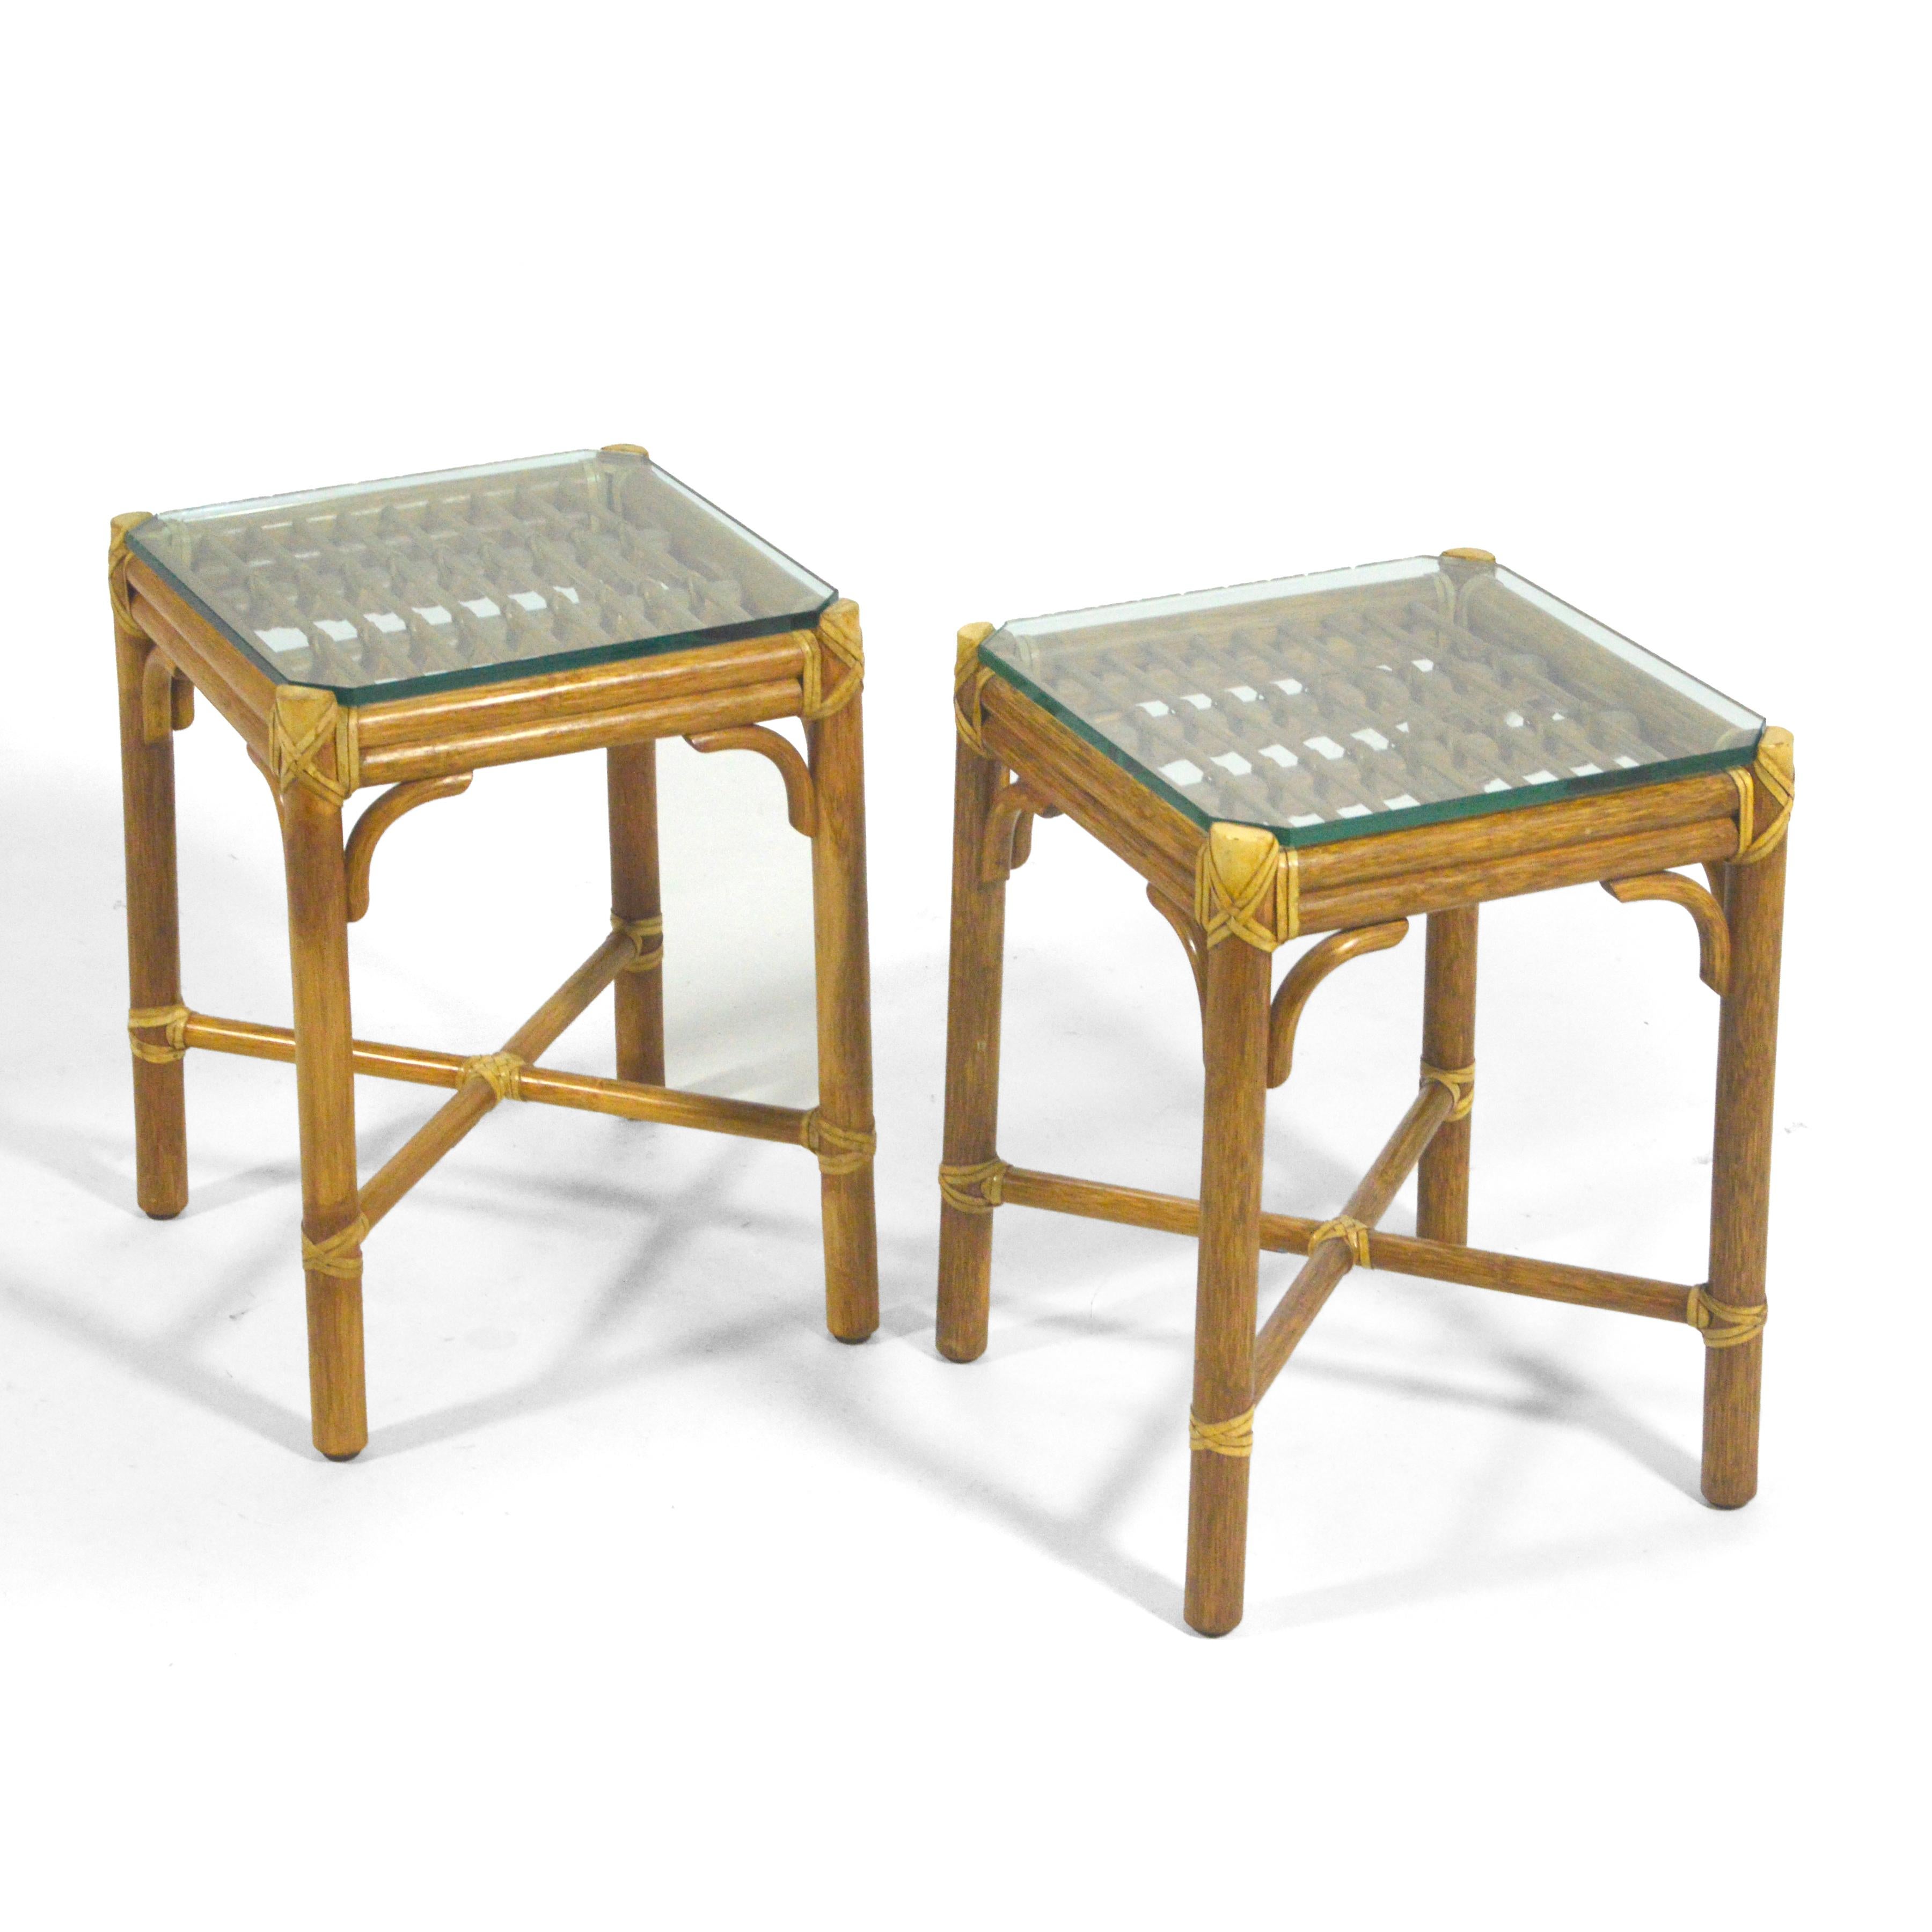 Elinor McGuire designed these rattan side tables/ nightstands for McGuire of San Fransisco, the company she started with her husband John. McGuire furniture is made to last generations. Not only is the design tasteful and understated, the quality is